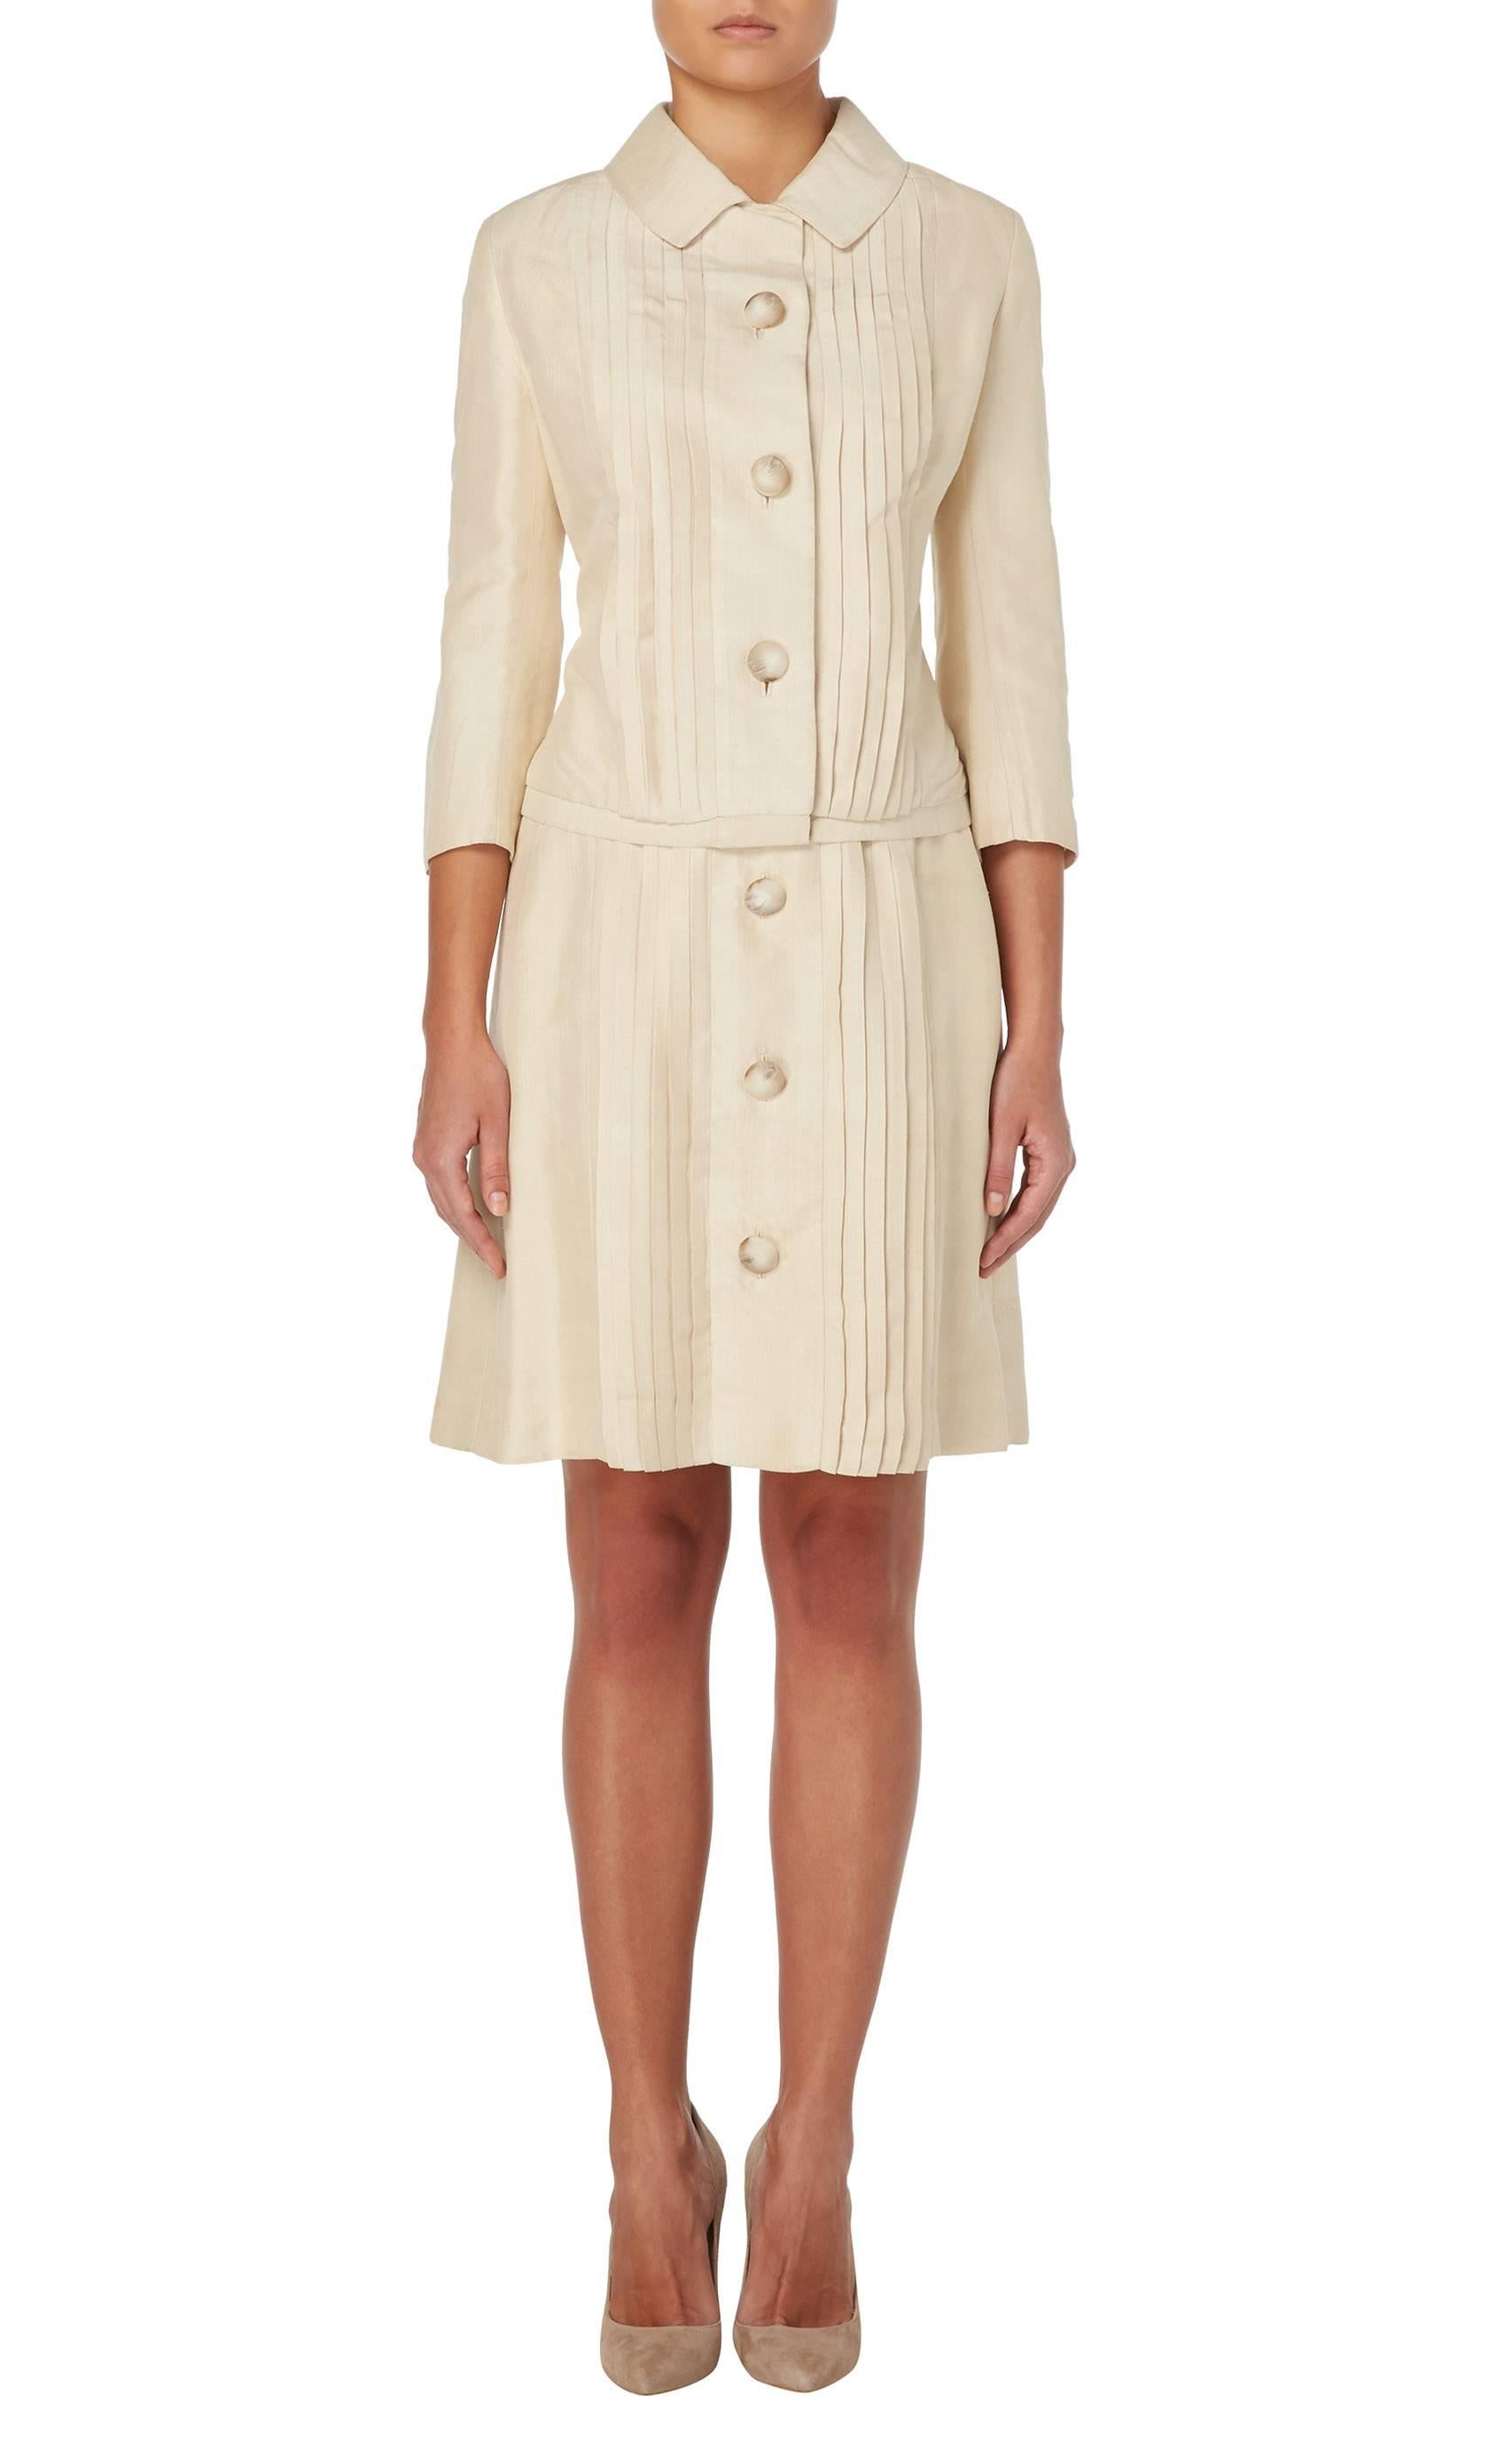 Constructed in fine pale beige silk, this lightweight and pleated skirt suit by Jean Patou is will make for a refreshing summer look. Lined in ivory silk and with the original pale horn buttons, the suit is designed to be less structured and is more